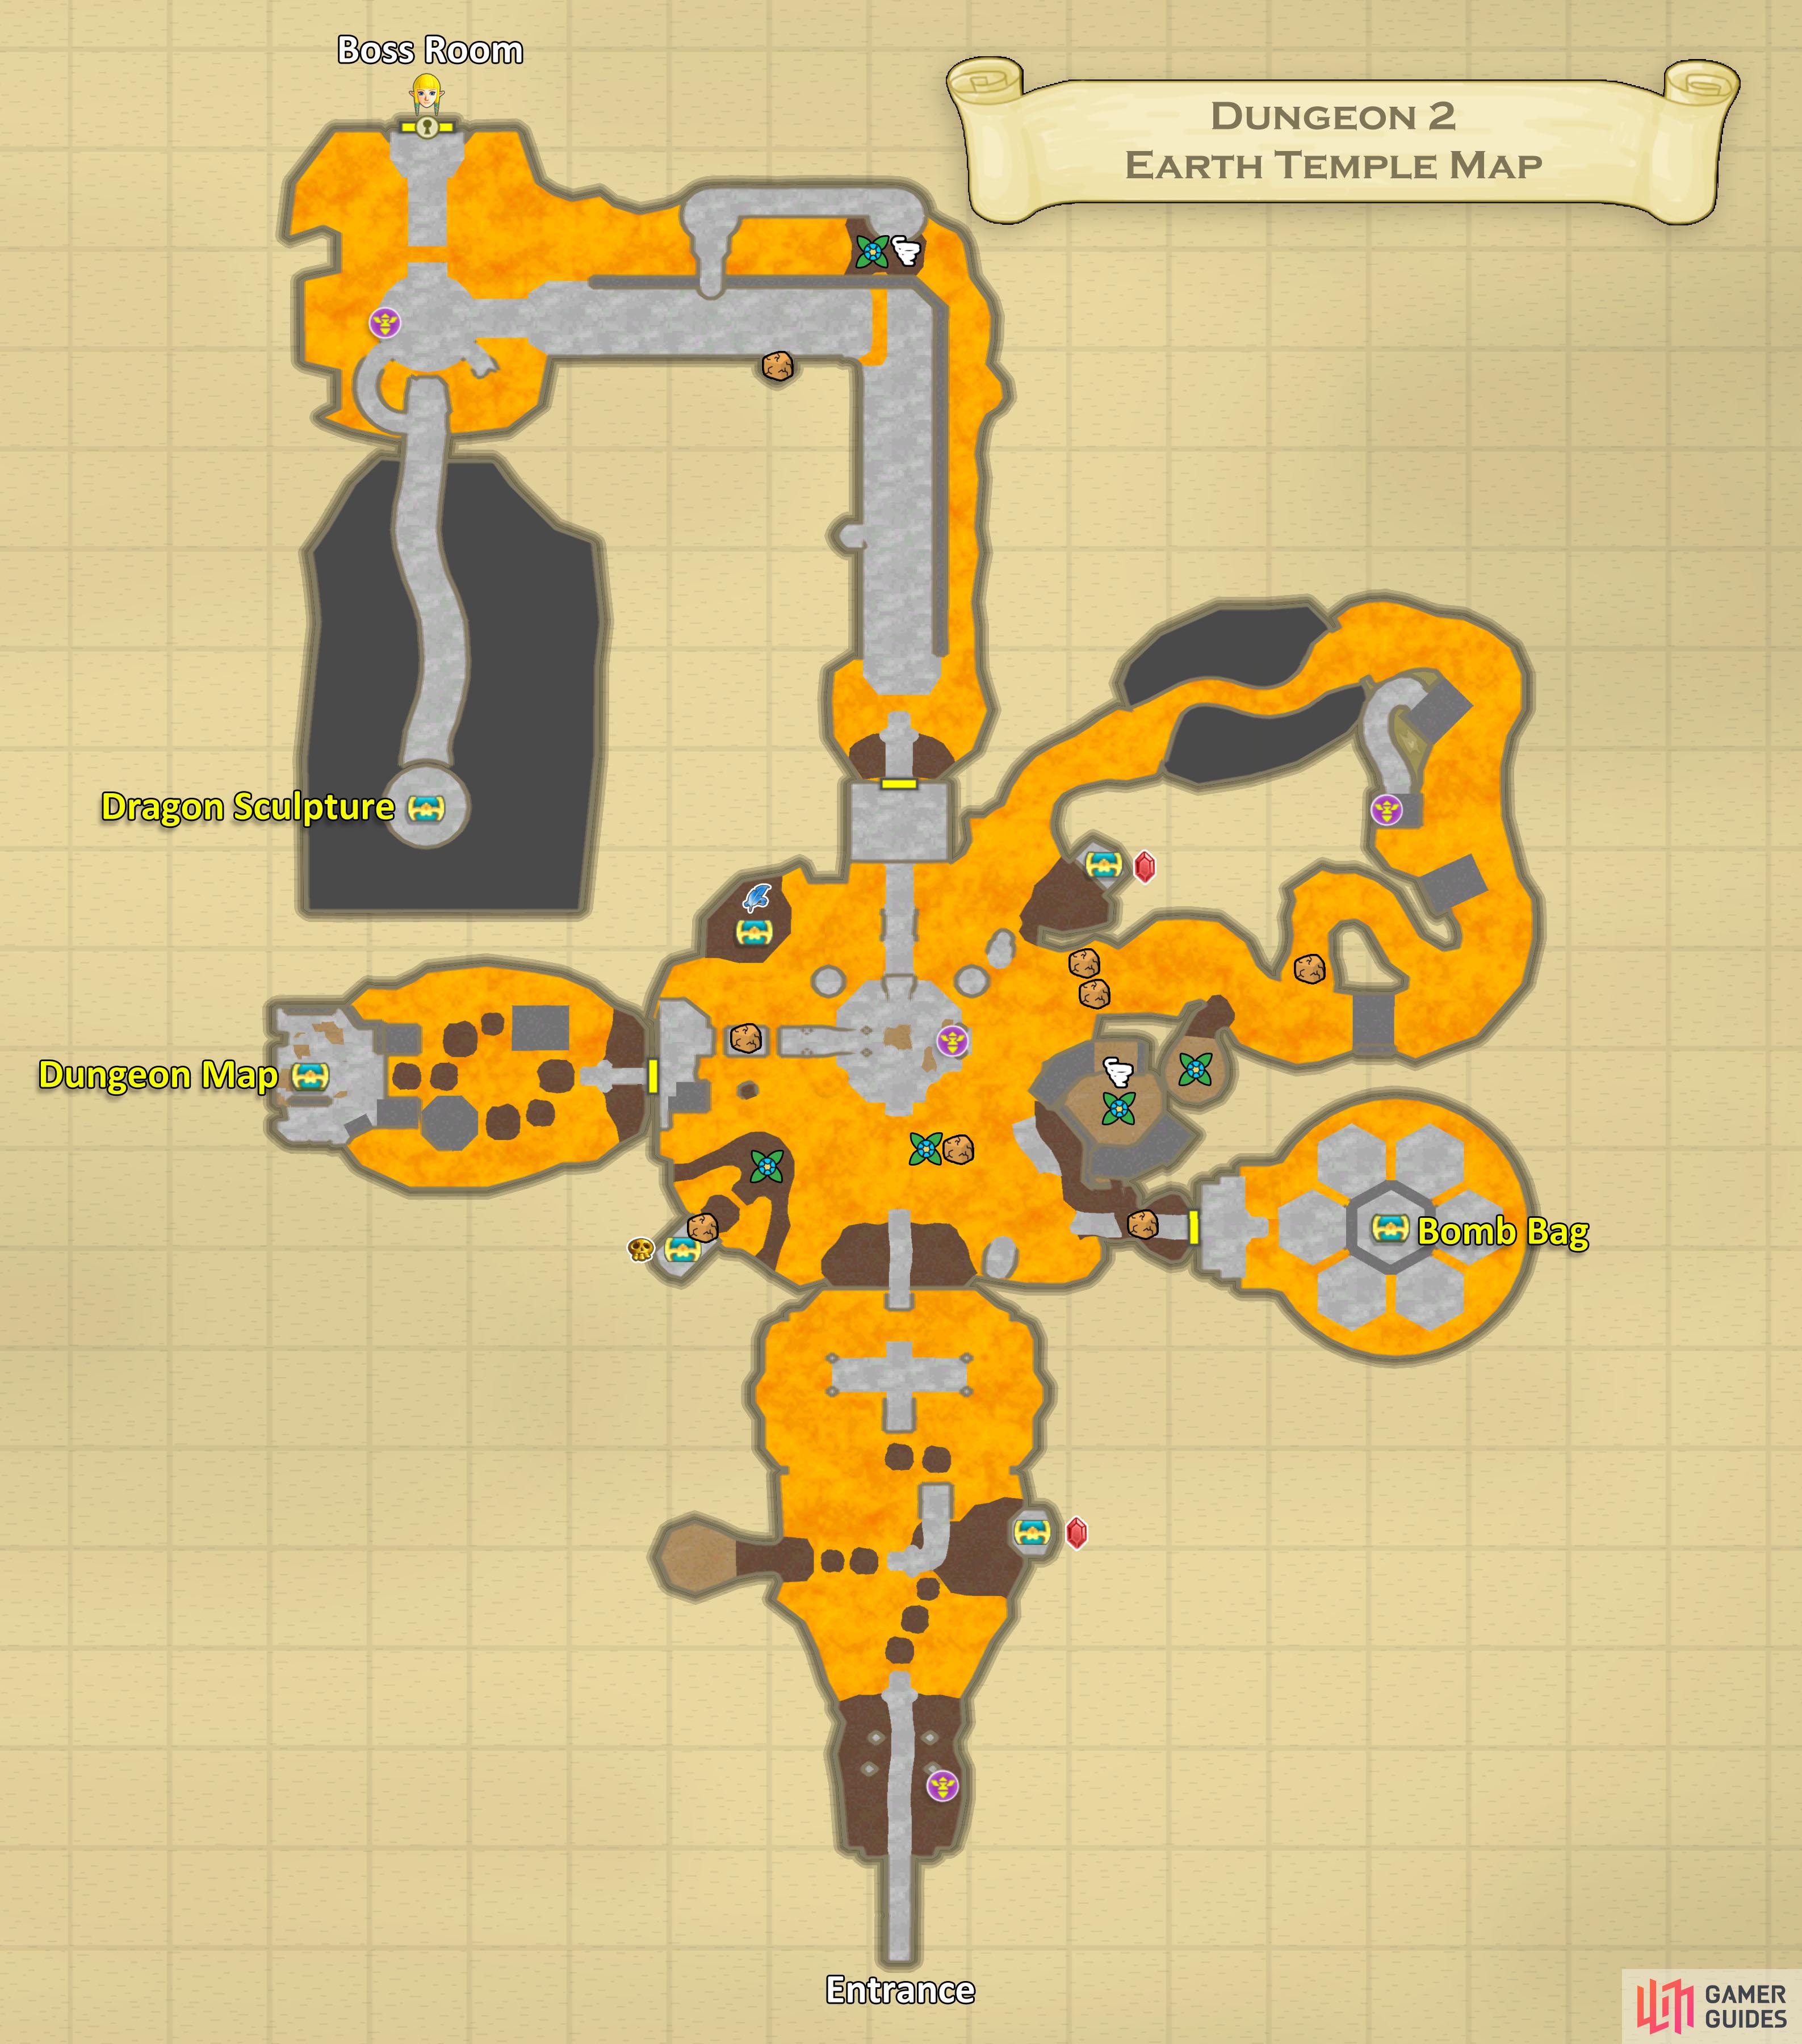 Map of the Earth Temple.